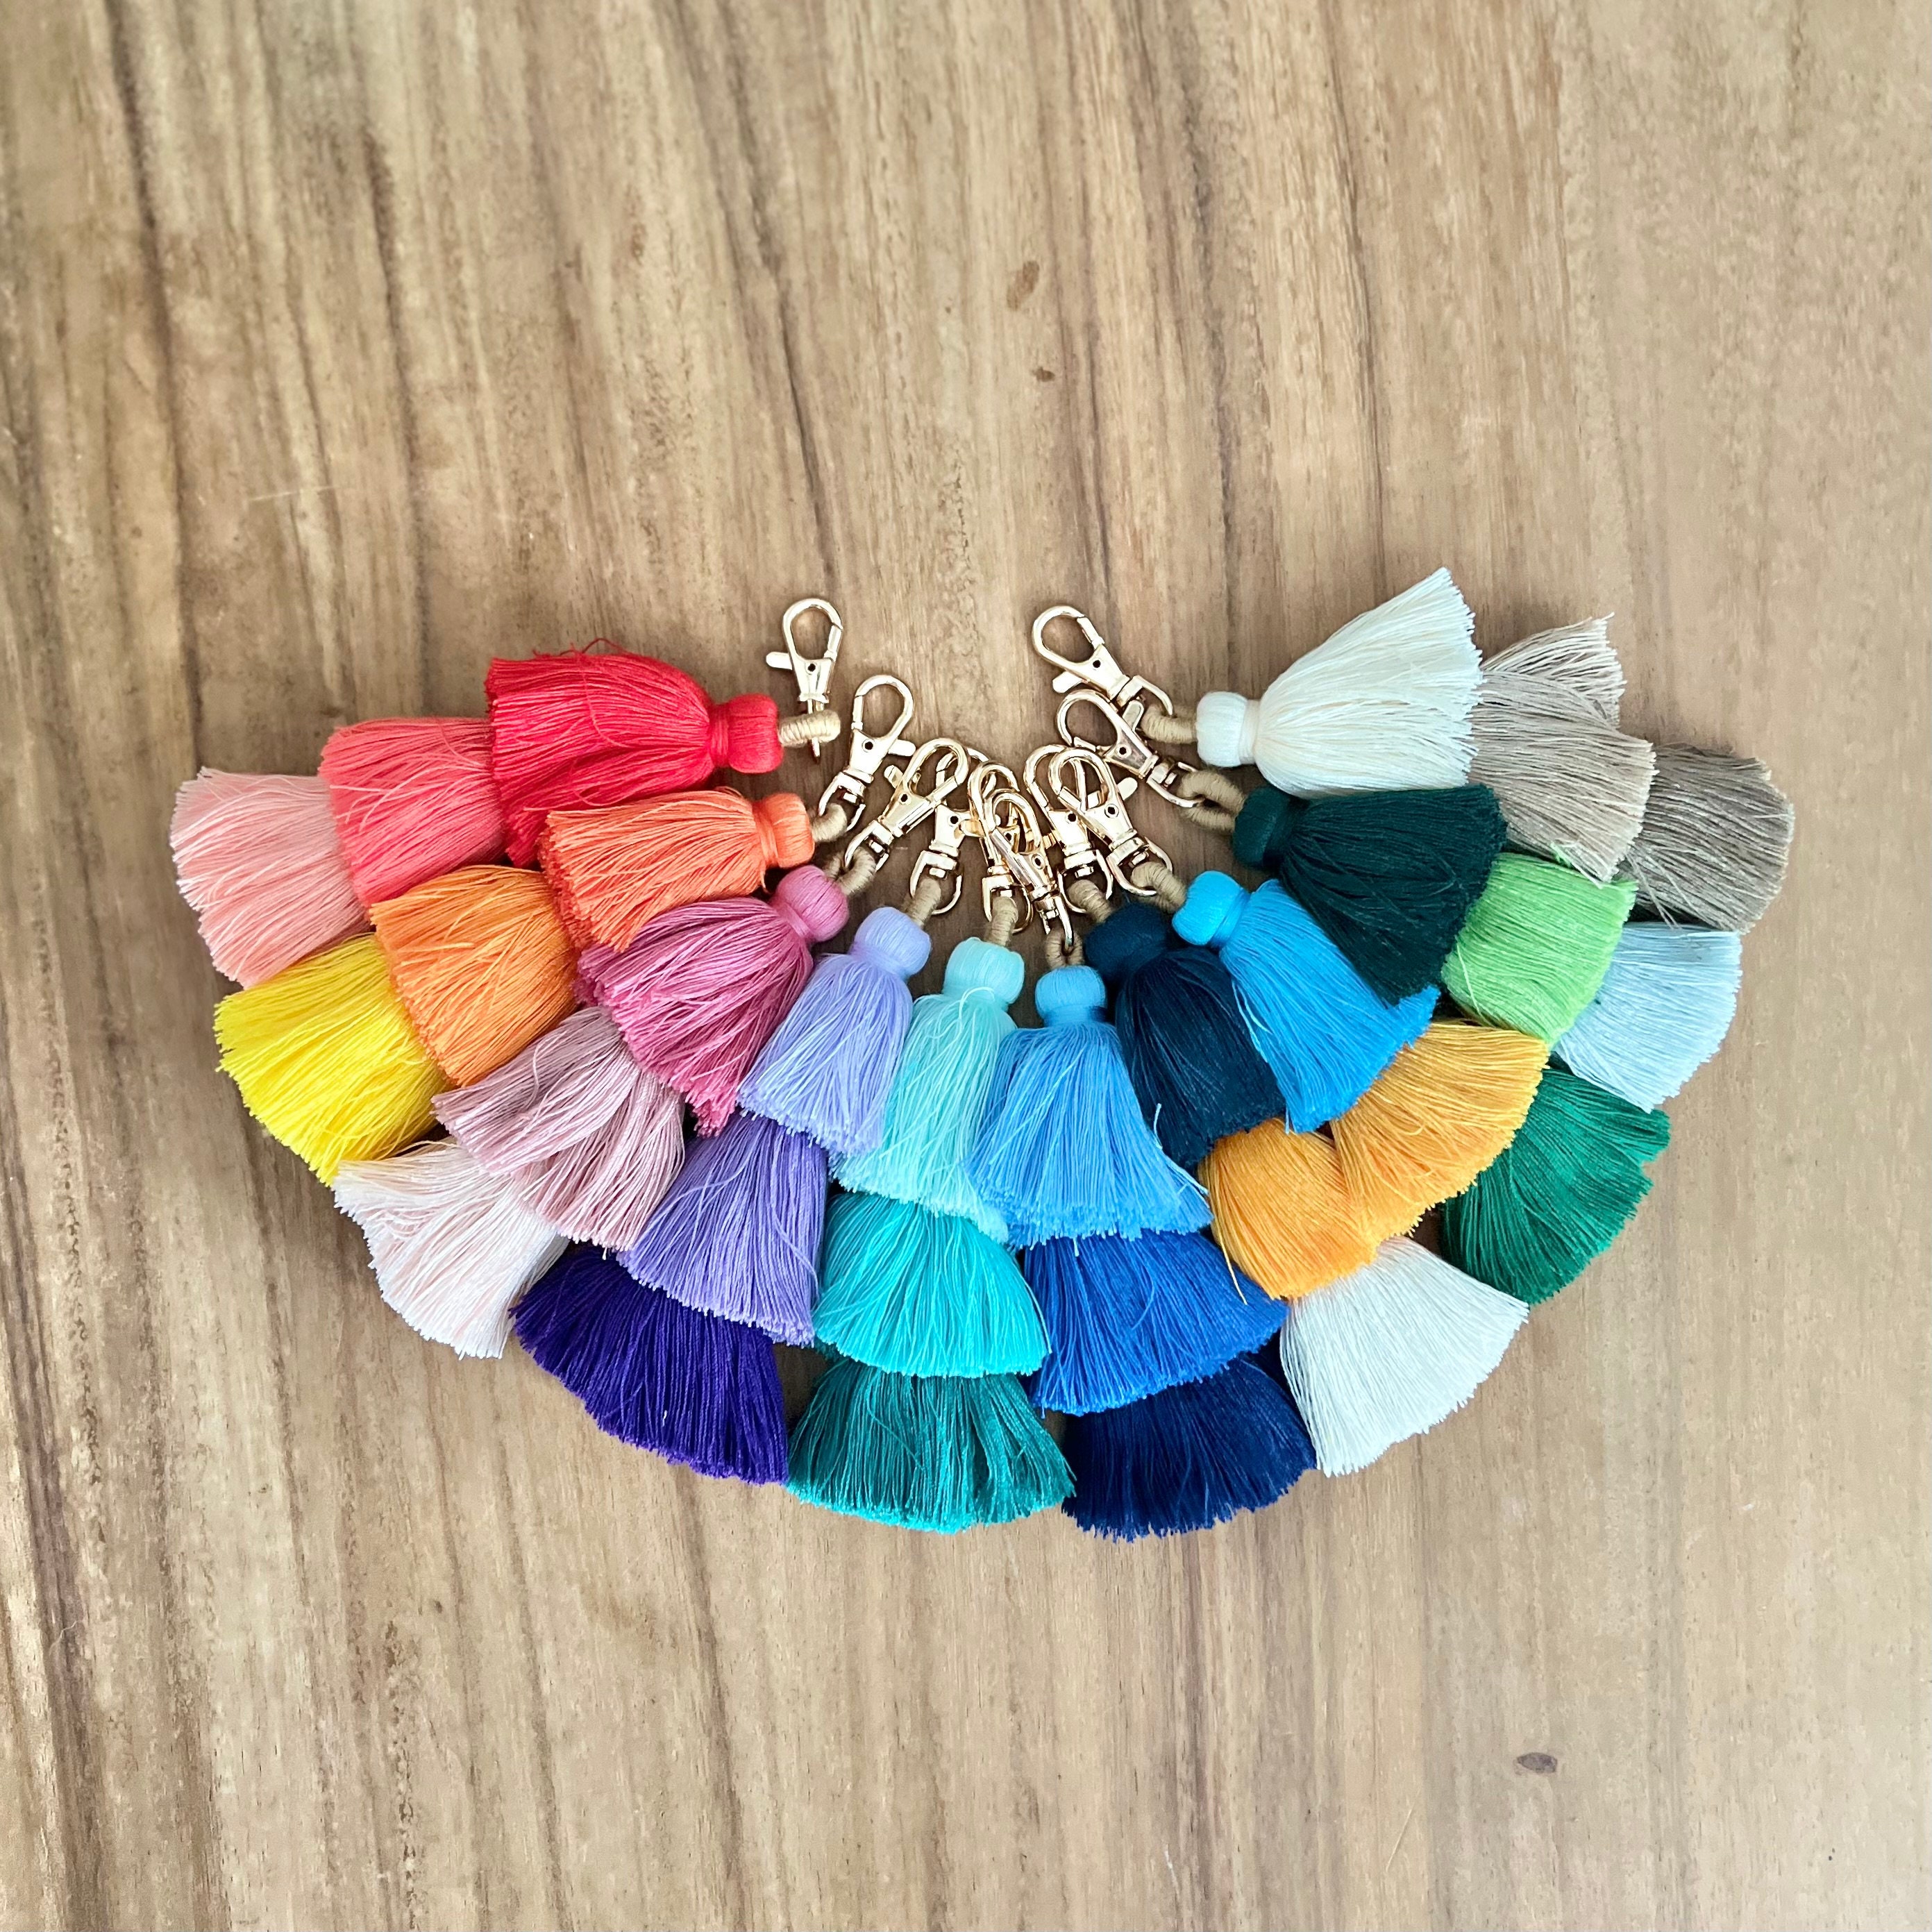 SPUNKYCHARMS Wholesale 100pcs Mini Tassel Charms Tiny Short Cotton Tassel Supplies for Crafts and Jewelry Making 